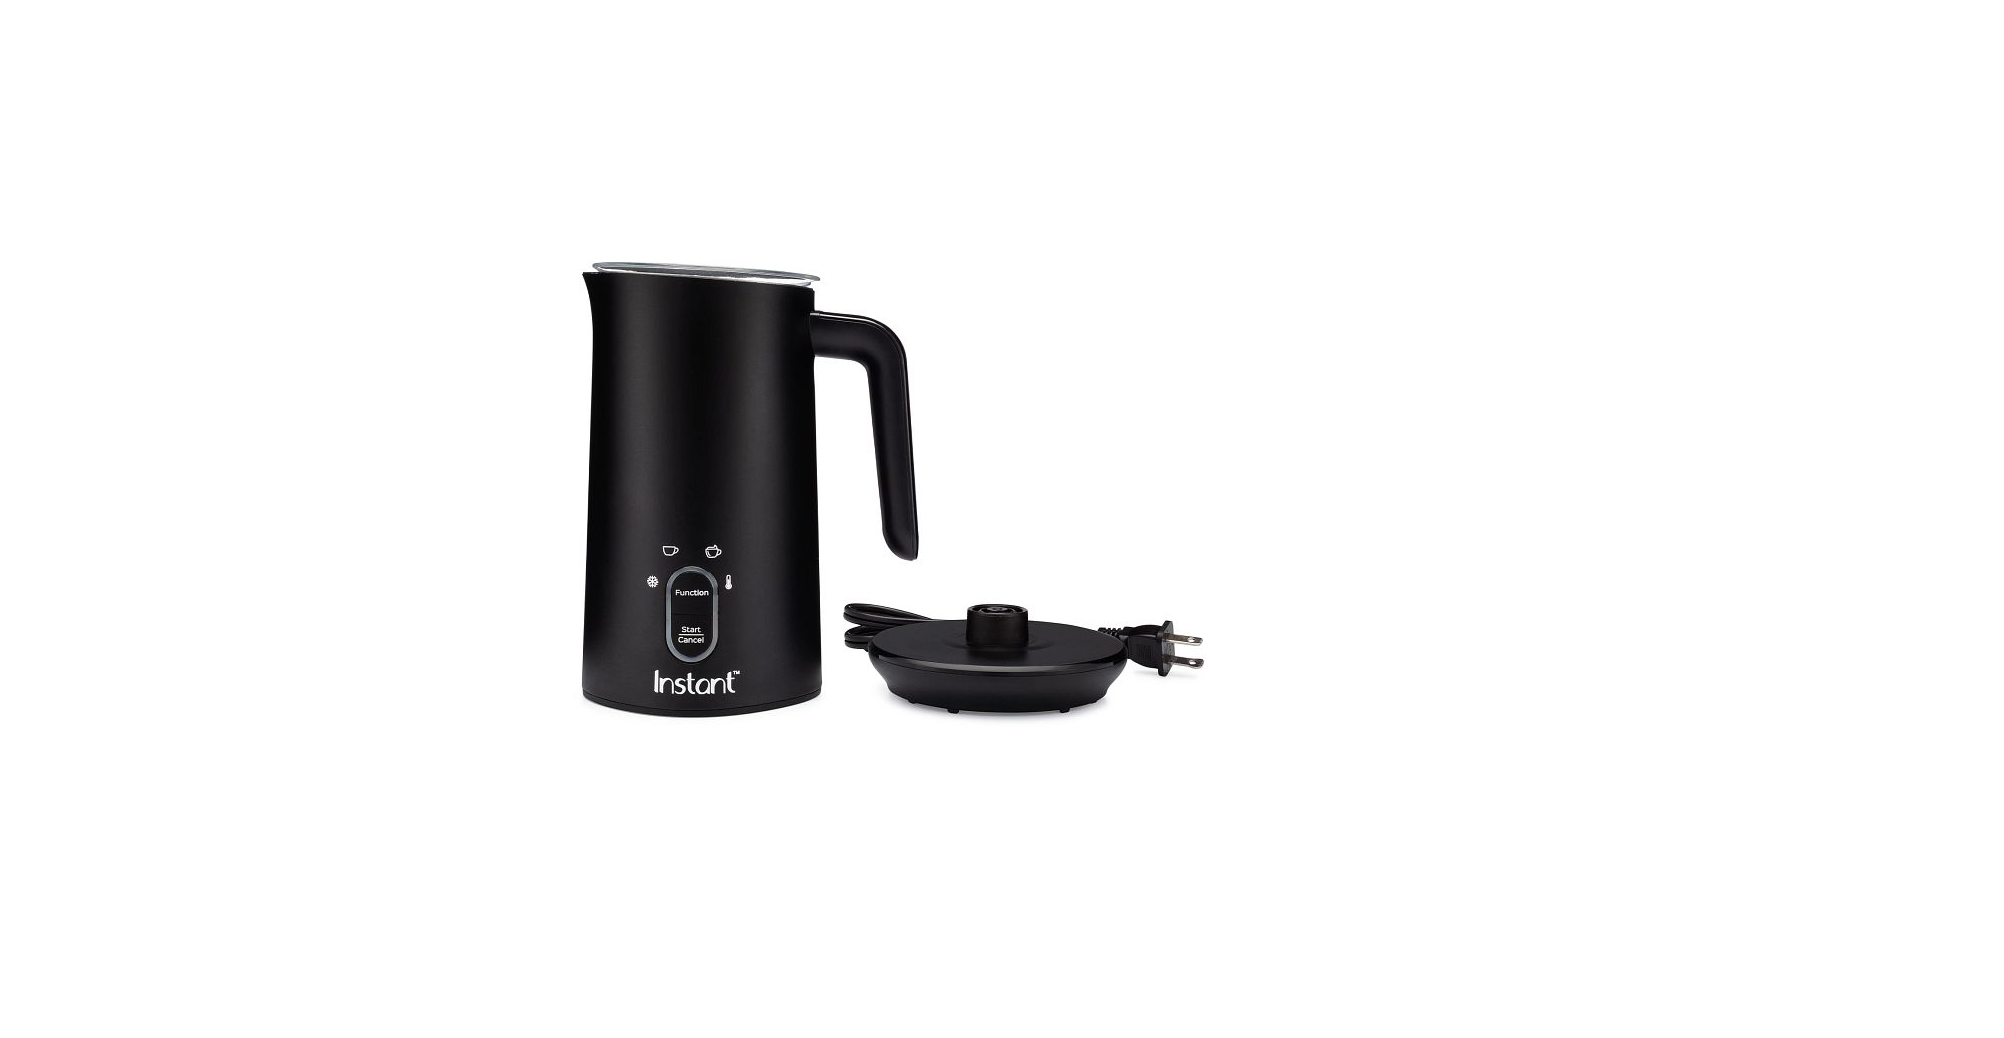 https://manualsclip.com/wp-content/uploads/2023/03/Instant-Electric-Milk-Frother-User-Manual-featured-img.png